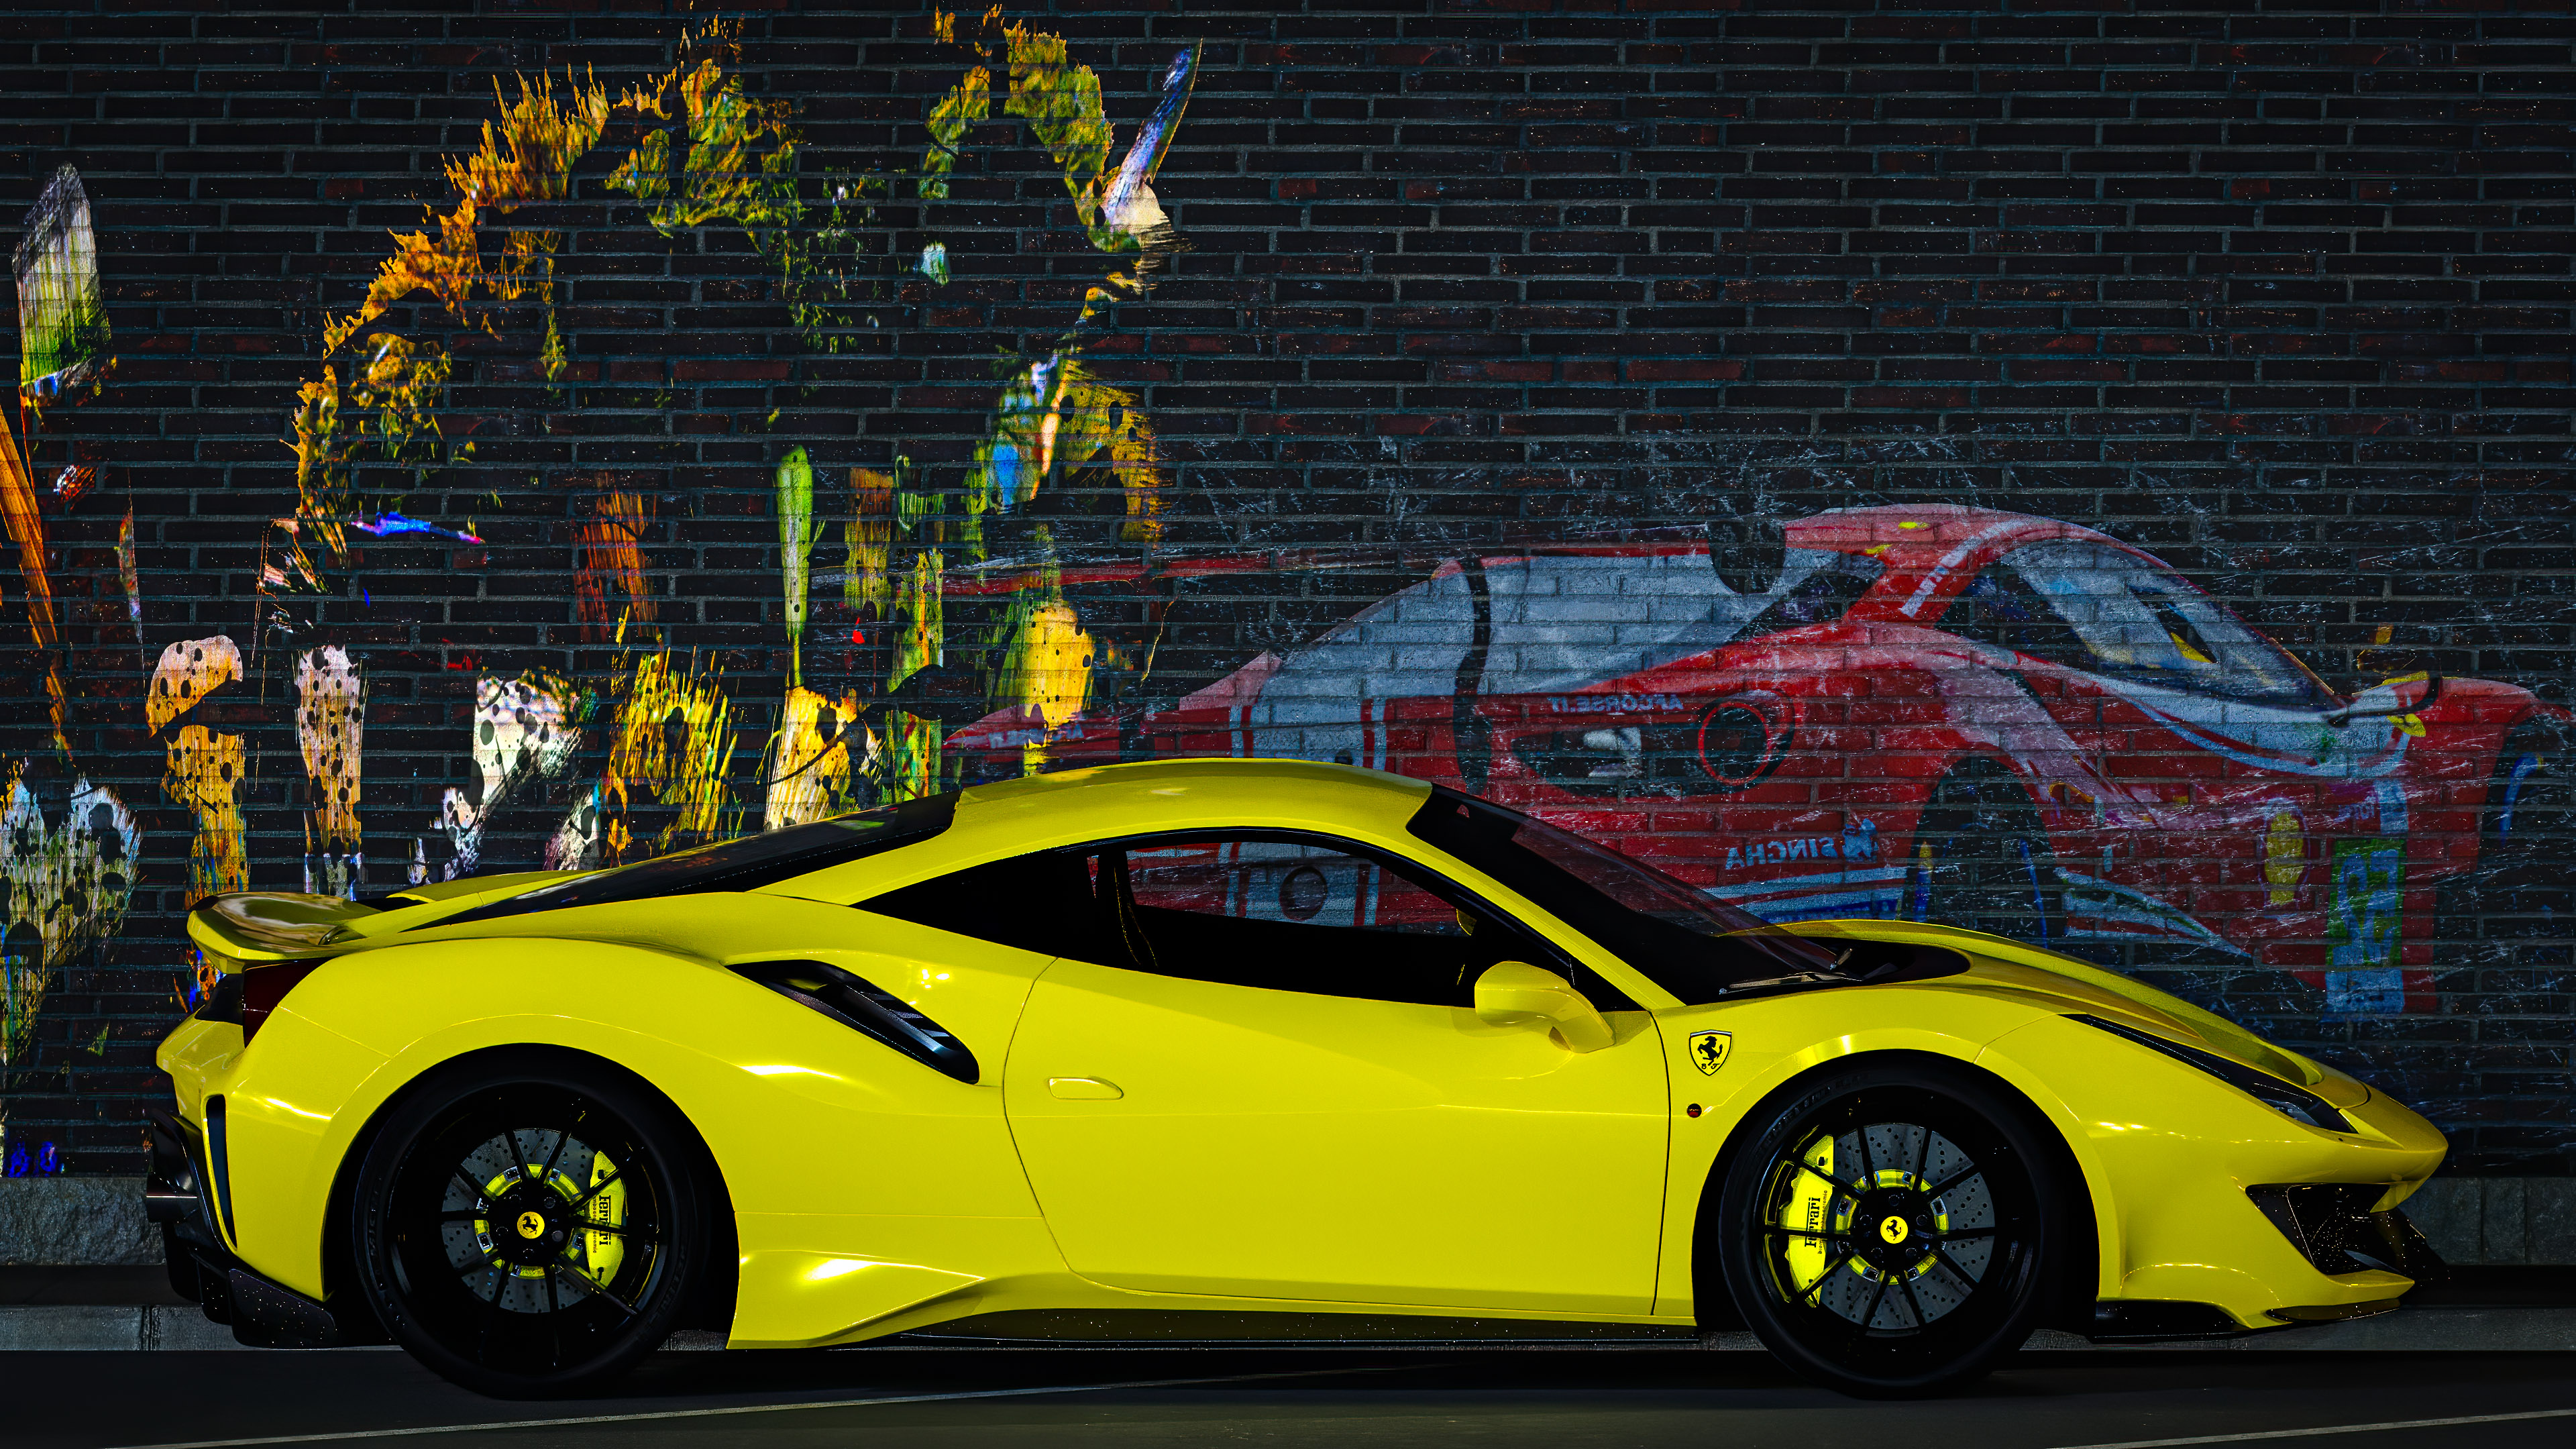 For the Ferrari enthusiasts, we offer a full HD car wallpaper featuring the Ferrari 488, a symbol of Italian craftsmanship and performance, captured in stunning detail.